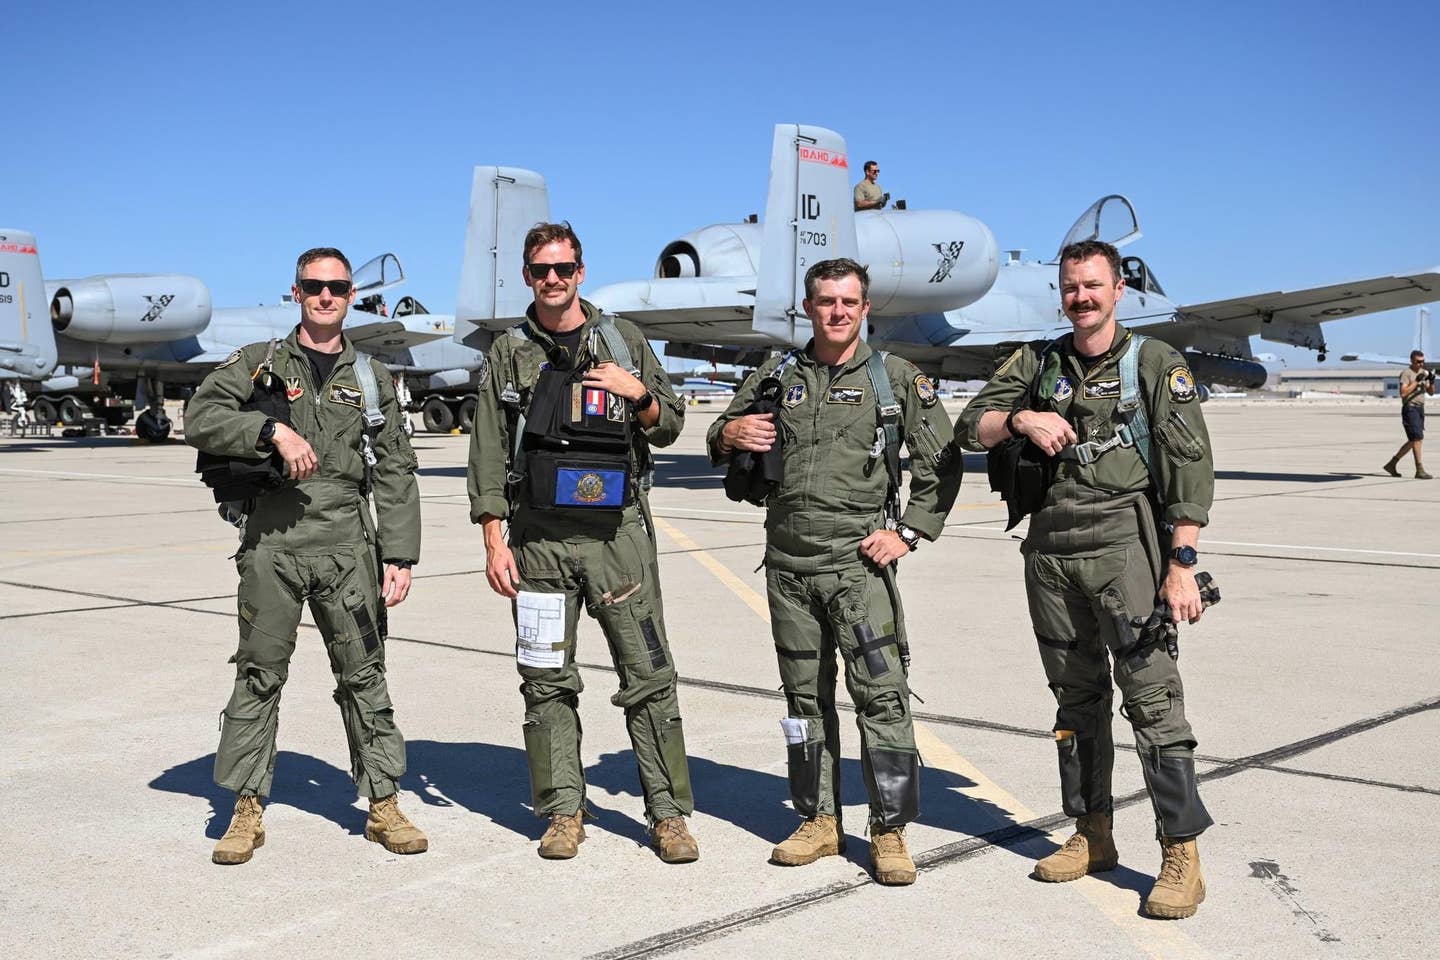 The 190th Fighter Squadron, having won this aerial warfighter skills competition three times since its inception in 2000, is back on their home turf defending the title. <em>Credit: U.S. Air Force photo by Staff Sergeant Joseph R. Morgan</em>